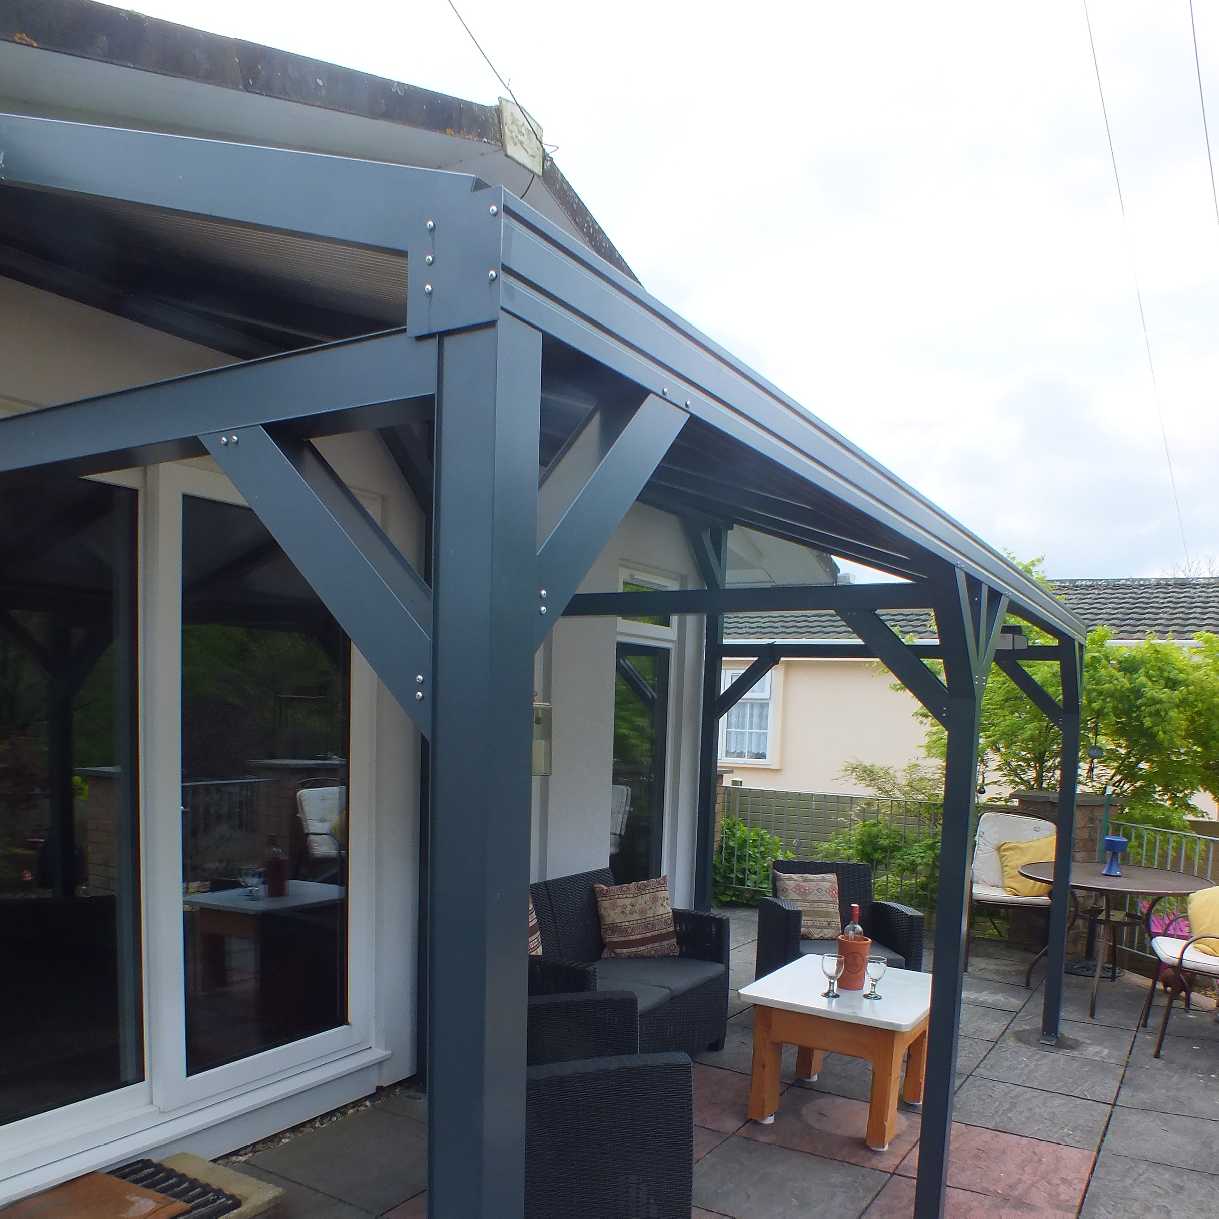 Affordable Omega Smart Free-Standing, Anthracite Grey MonoPitch Roof Canopy with 16mm Polycarbonate Glazing - 3.1m (W) x 2.5m (P), (4) Supporting Posts